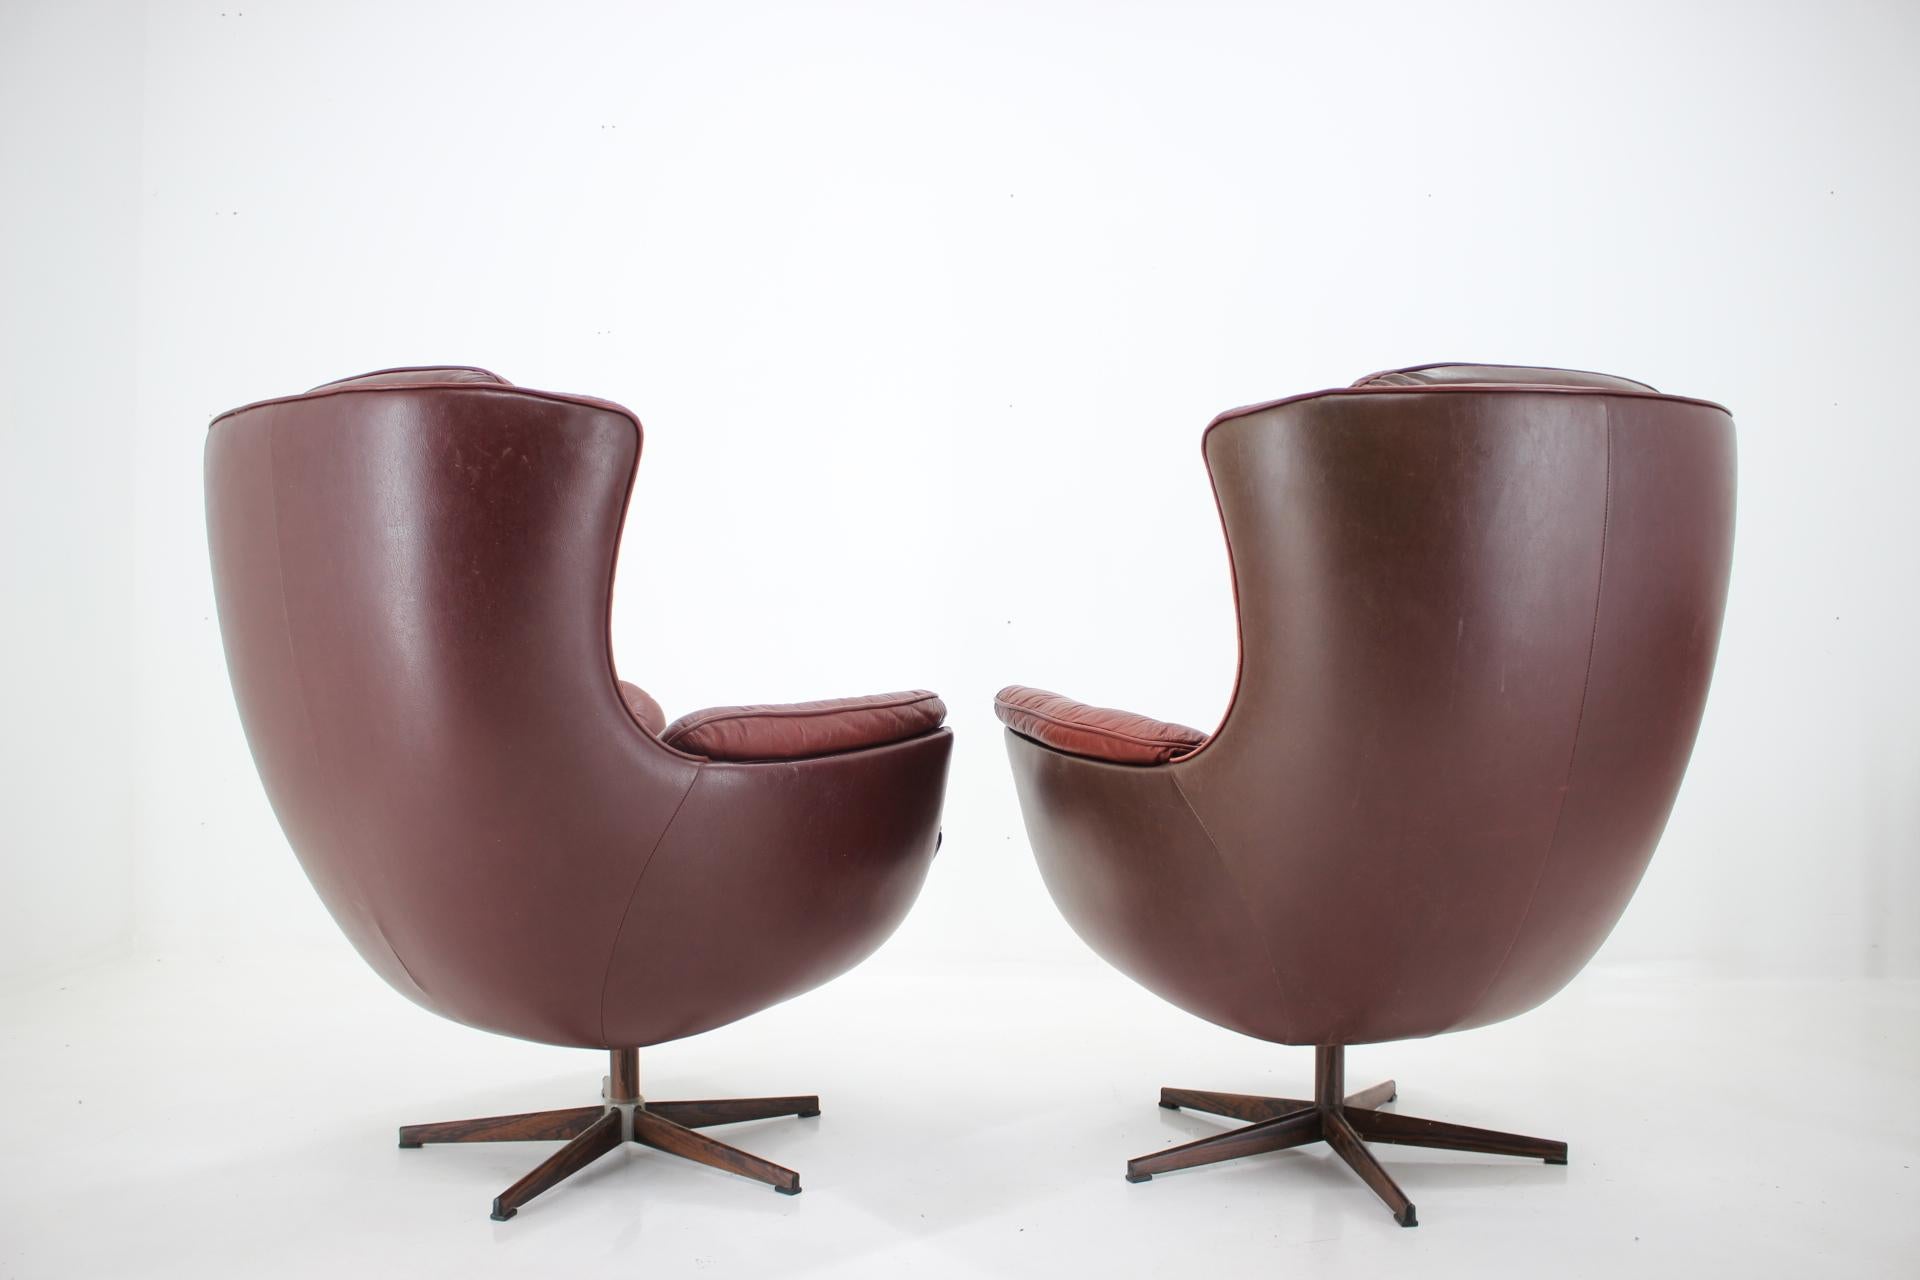 Space Age Design Scandinavian Leather Armchairs / Lounge Chairs by Peem, 1970s, Finland